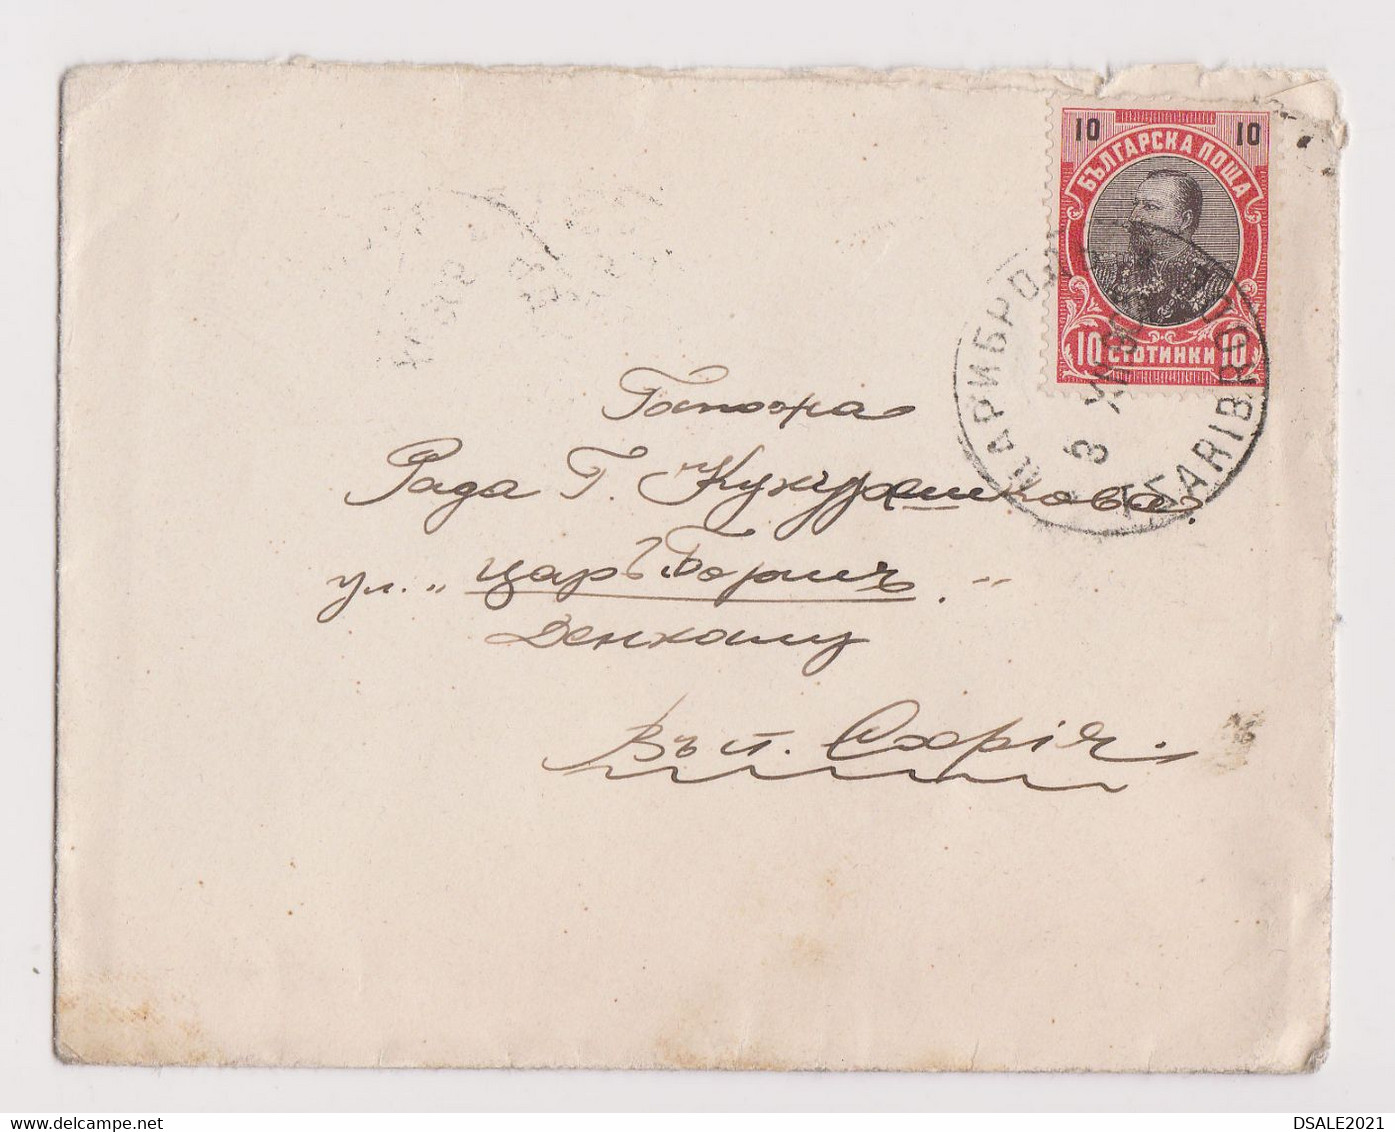 Bulgaria Bulgarie Cover 1903 W/Mi-Nr.54/10st. Ferdinand I, Definitive Stamp Rare TZARIBROD-Western Outlands Cachet Ds421 - Lettres & Documents